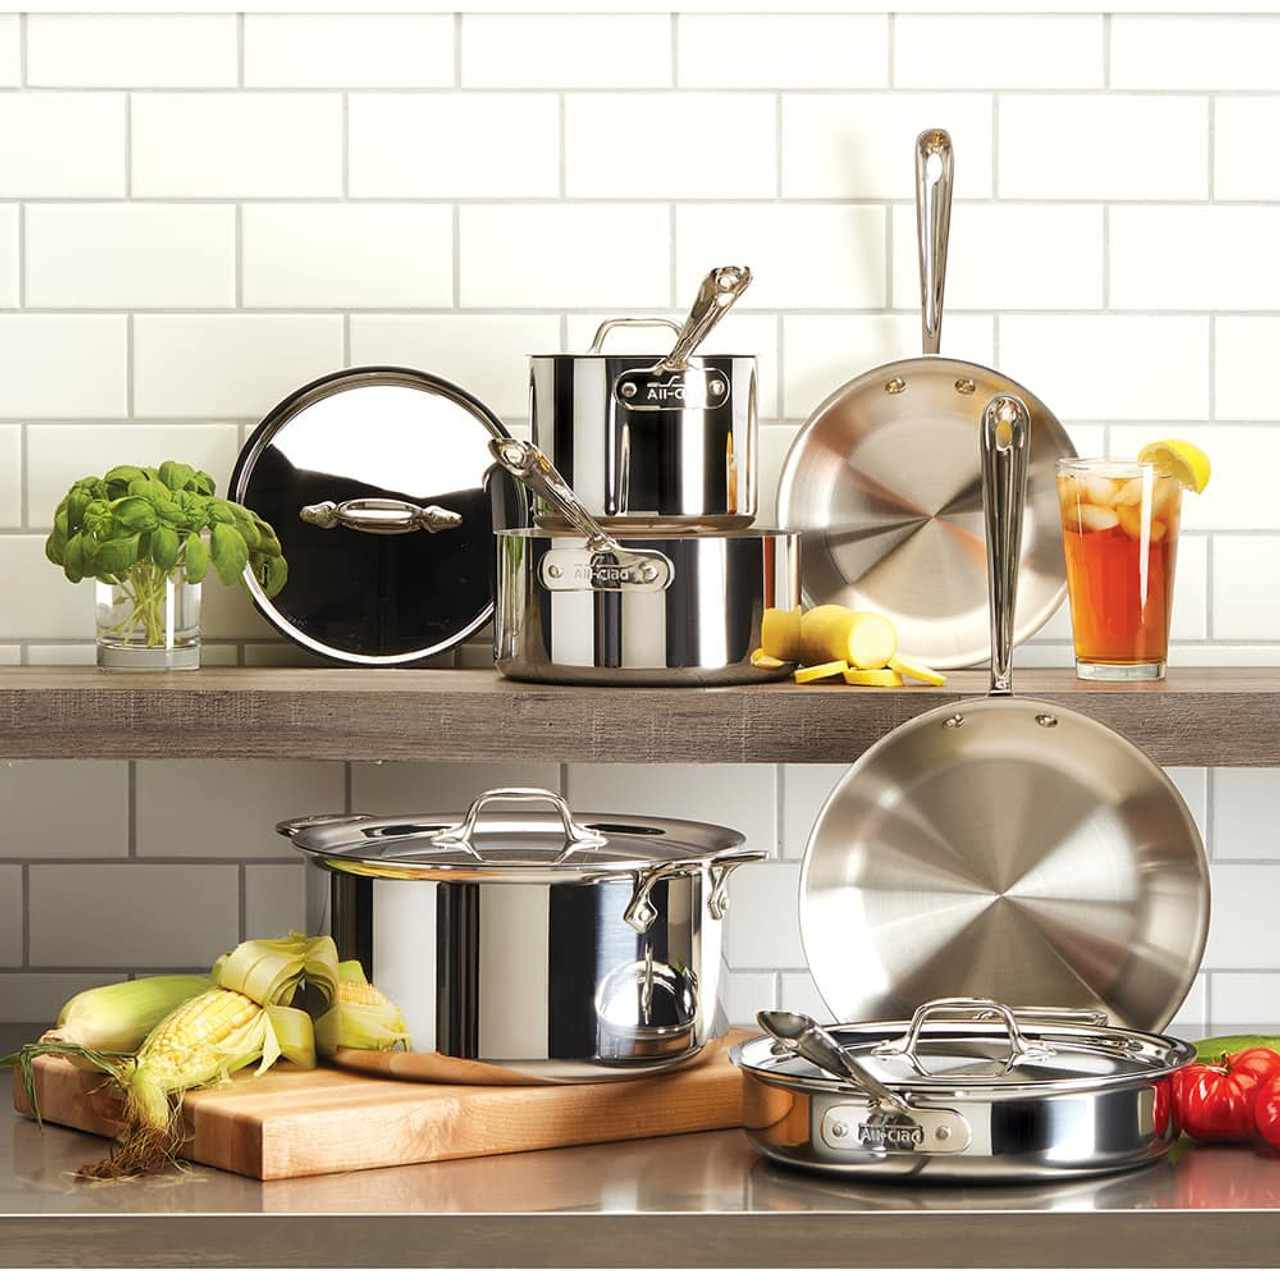 https://cdn11.bigcommerce.com/s-hccytny0od/images/stencil/1280x1280/products/484/8436/all-clad-stainless-10-piece-cookware-set-1__36379.1598234950.jpg?c=2?imbypass=on